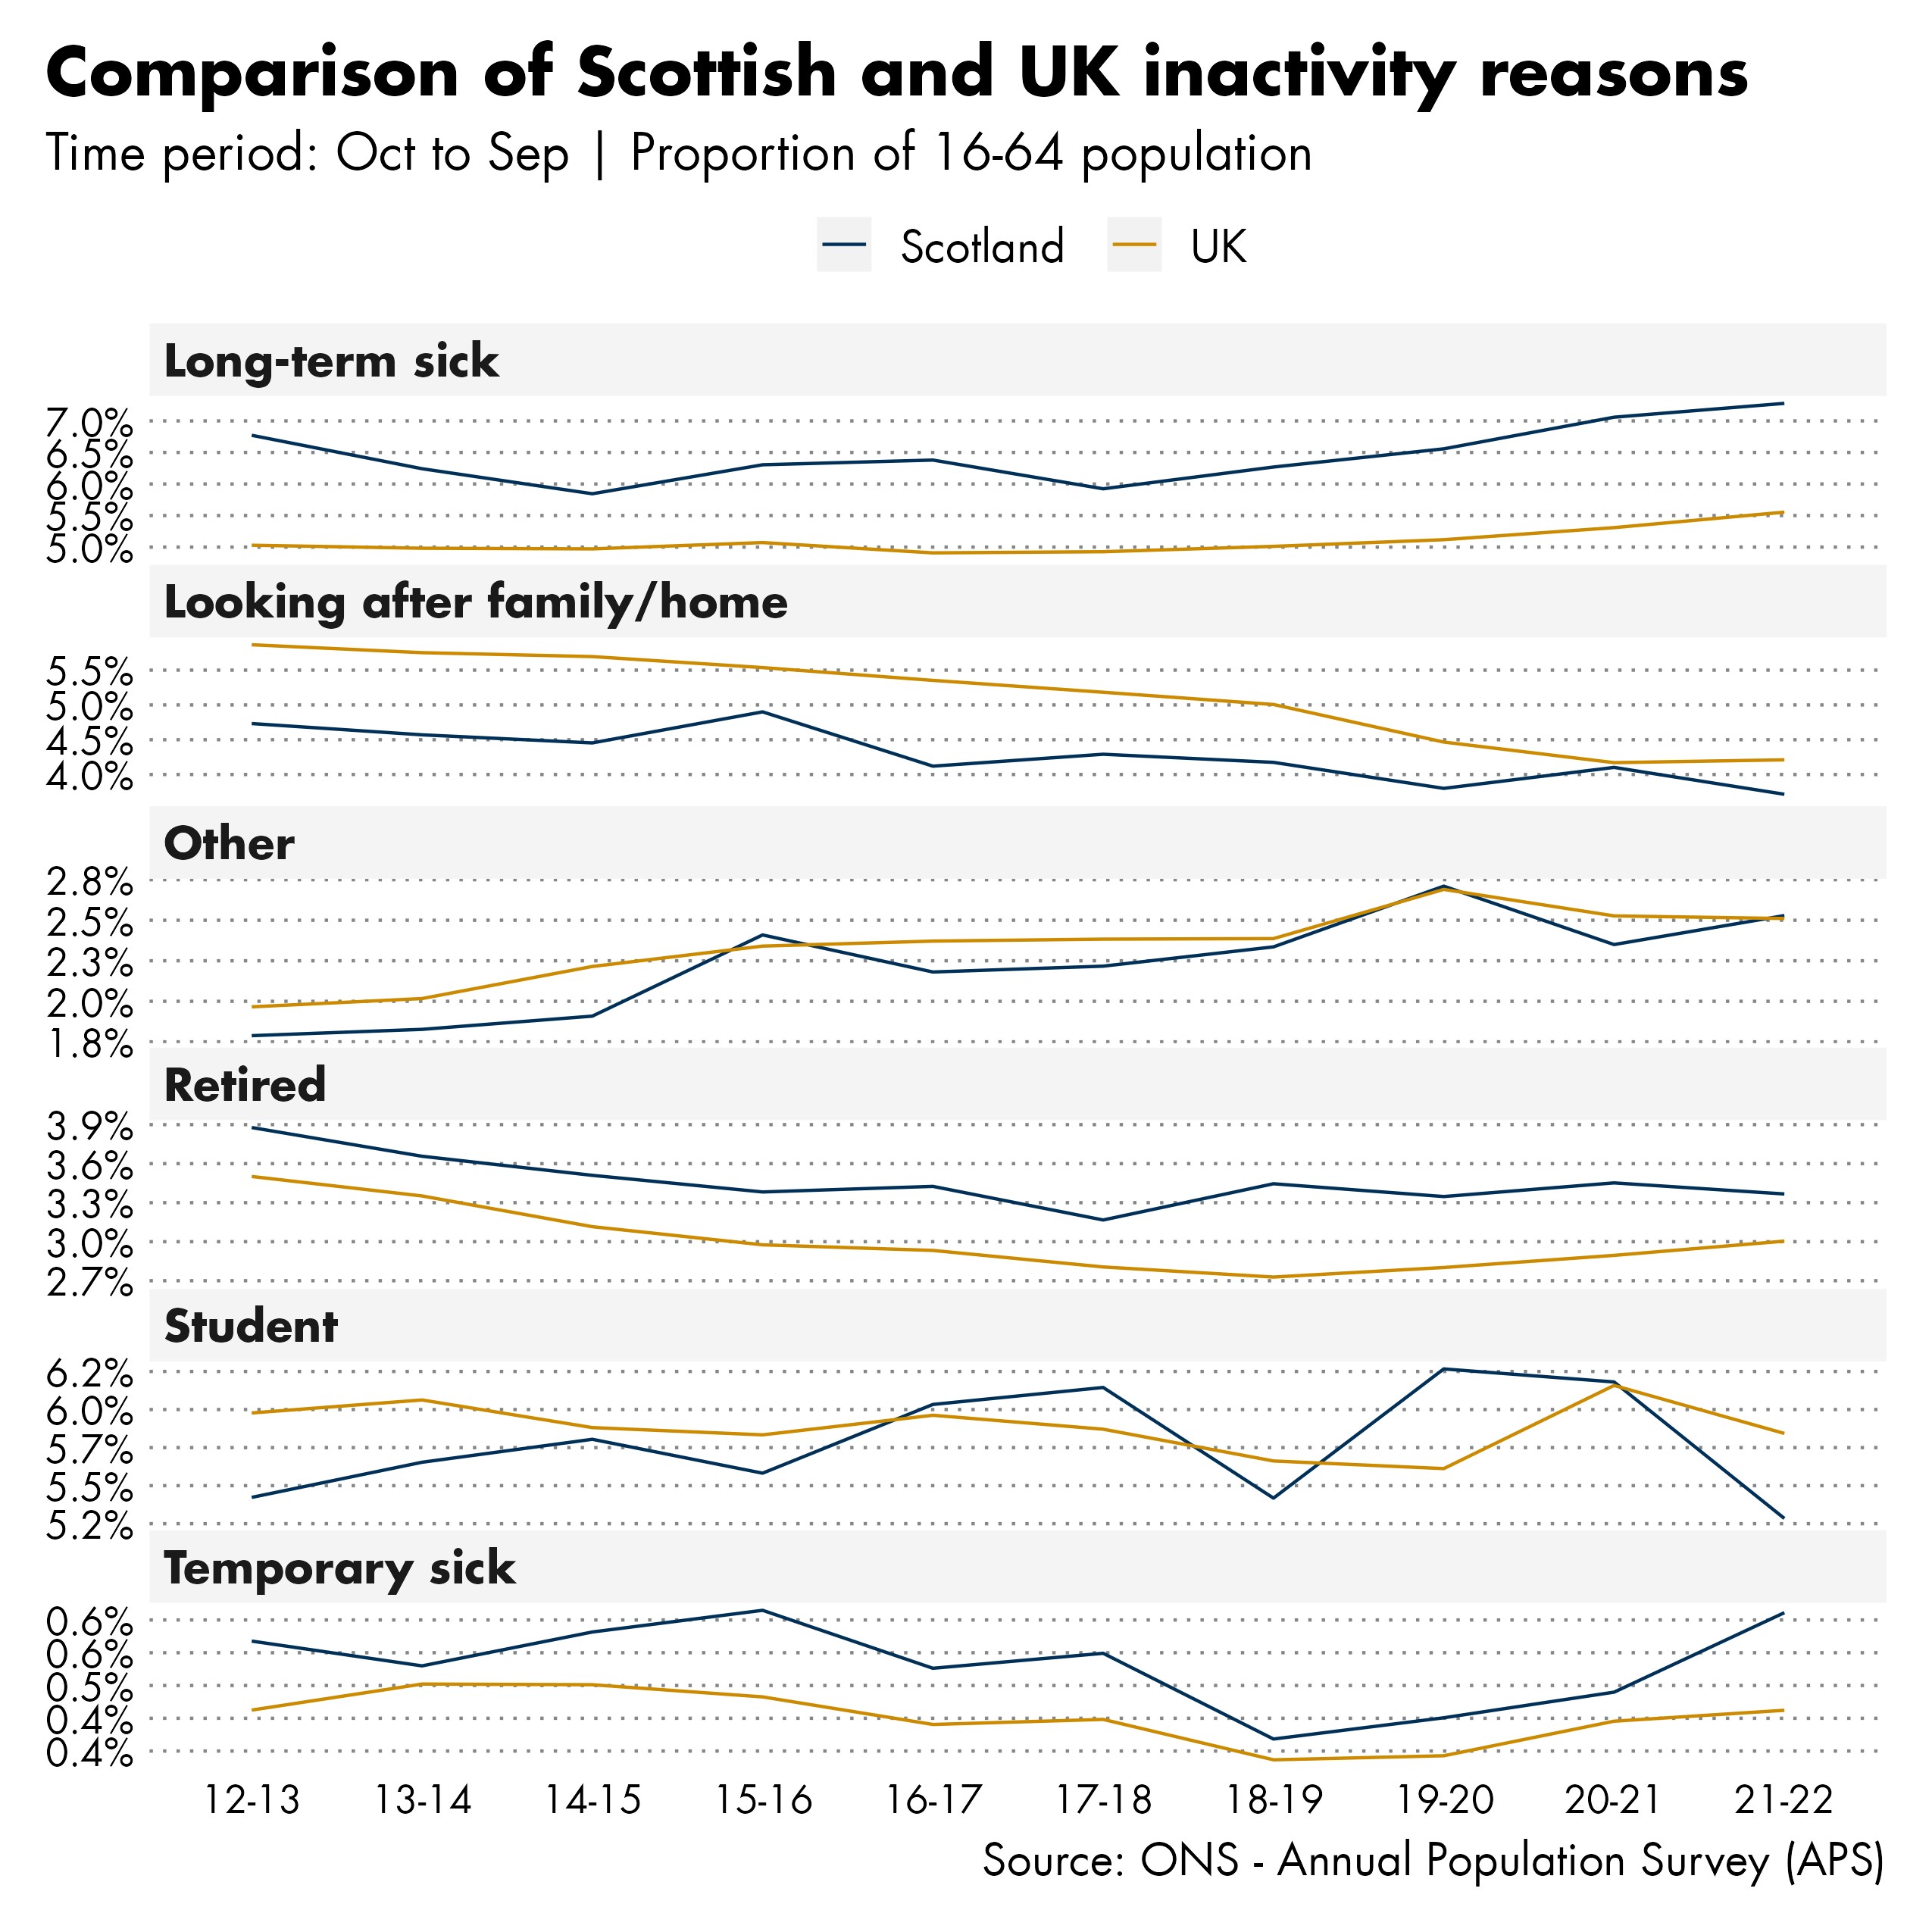 Comparison of Scottish and UK inactivity data by reason between October-December 2012-2013 and October-December 2021-22.